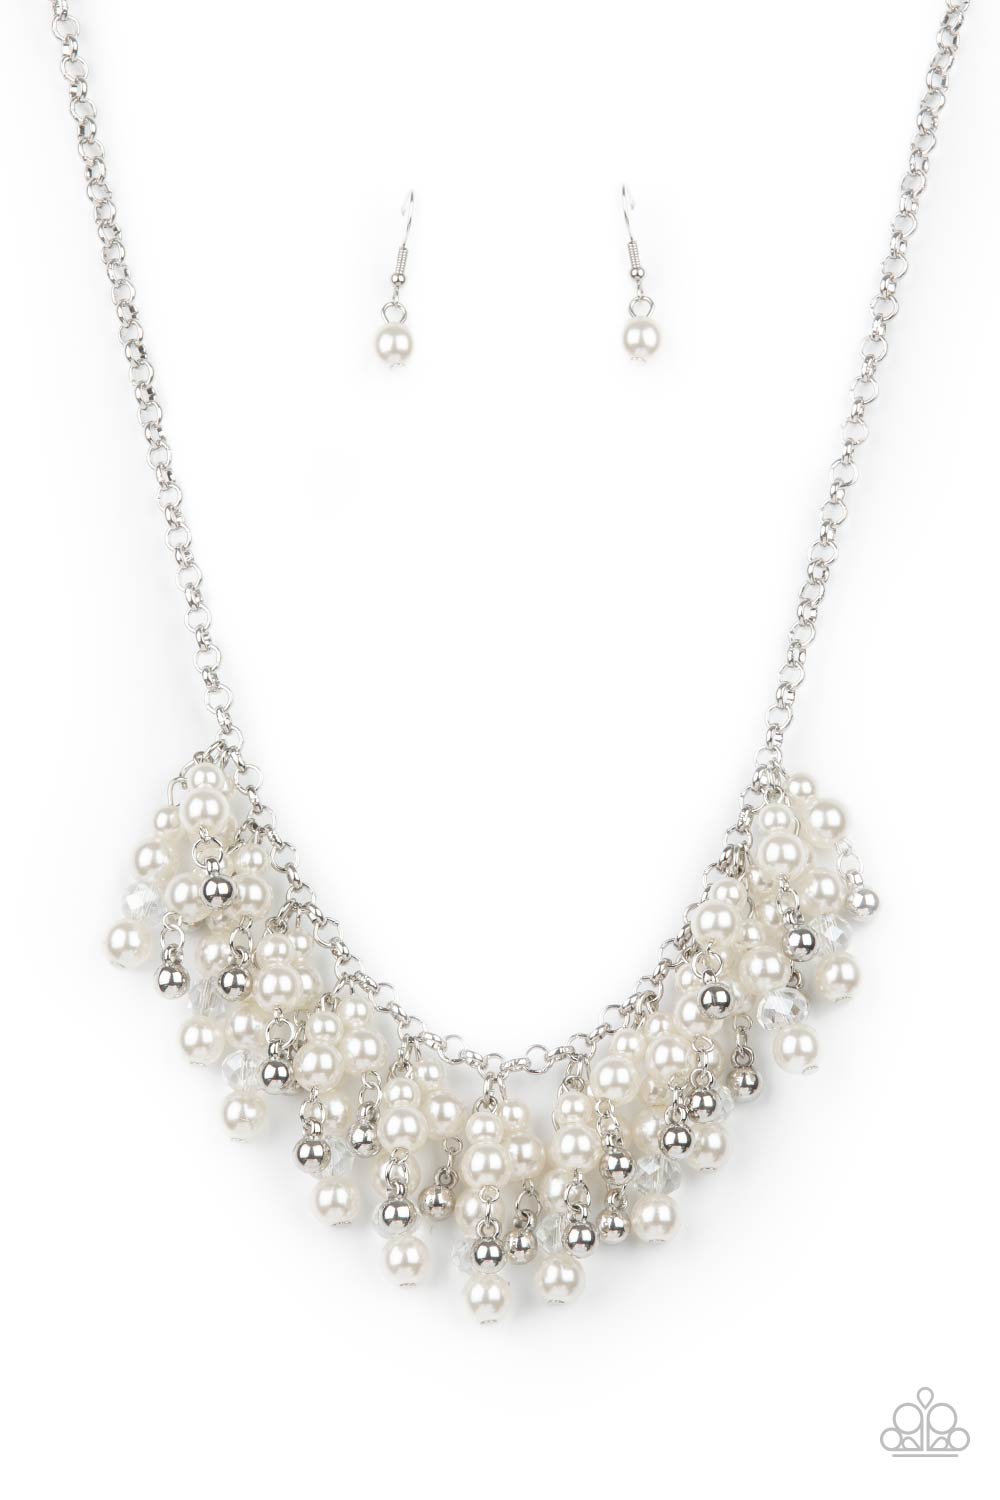 Champagne Dreams White Pearl Necklace - Paparazzi Accessories- lightbox - CarasShop.com - $5 Jewelry by Cara Jewels